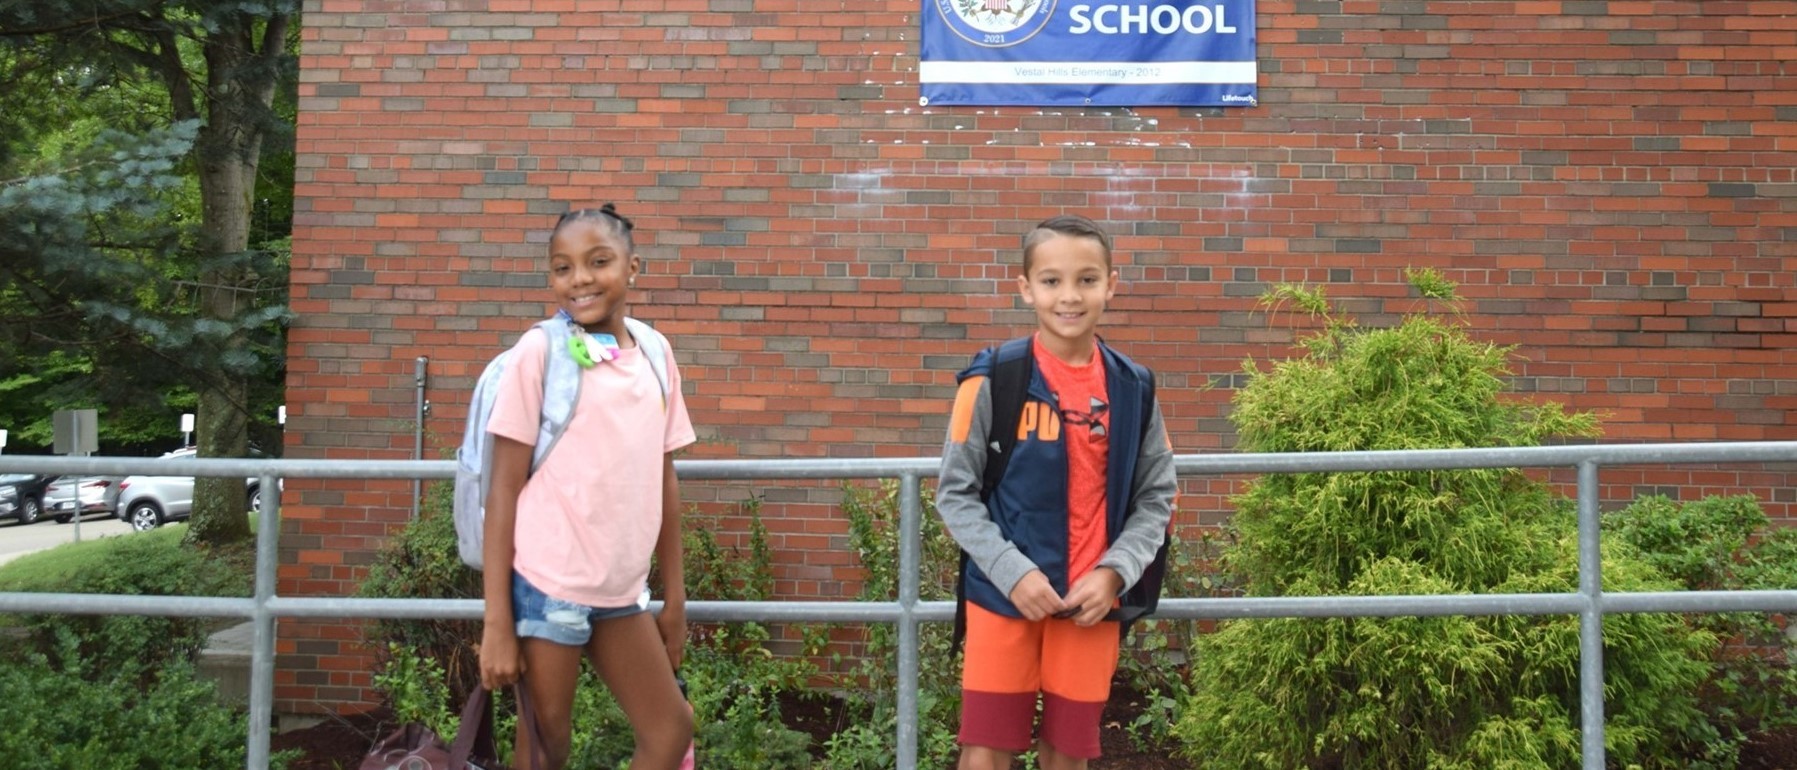 Vestal Hills Elementary fifth-graders head up to school on the first day of classes, September 8, 2022.